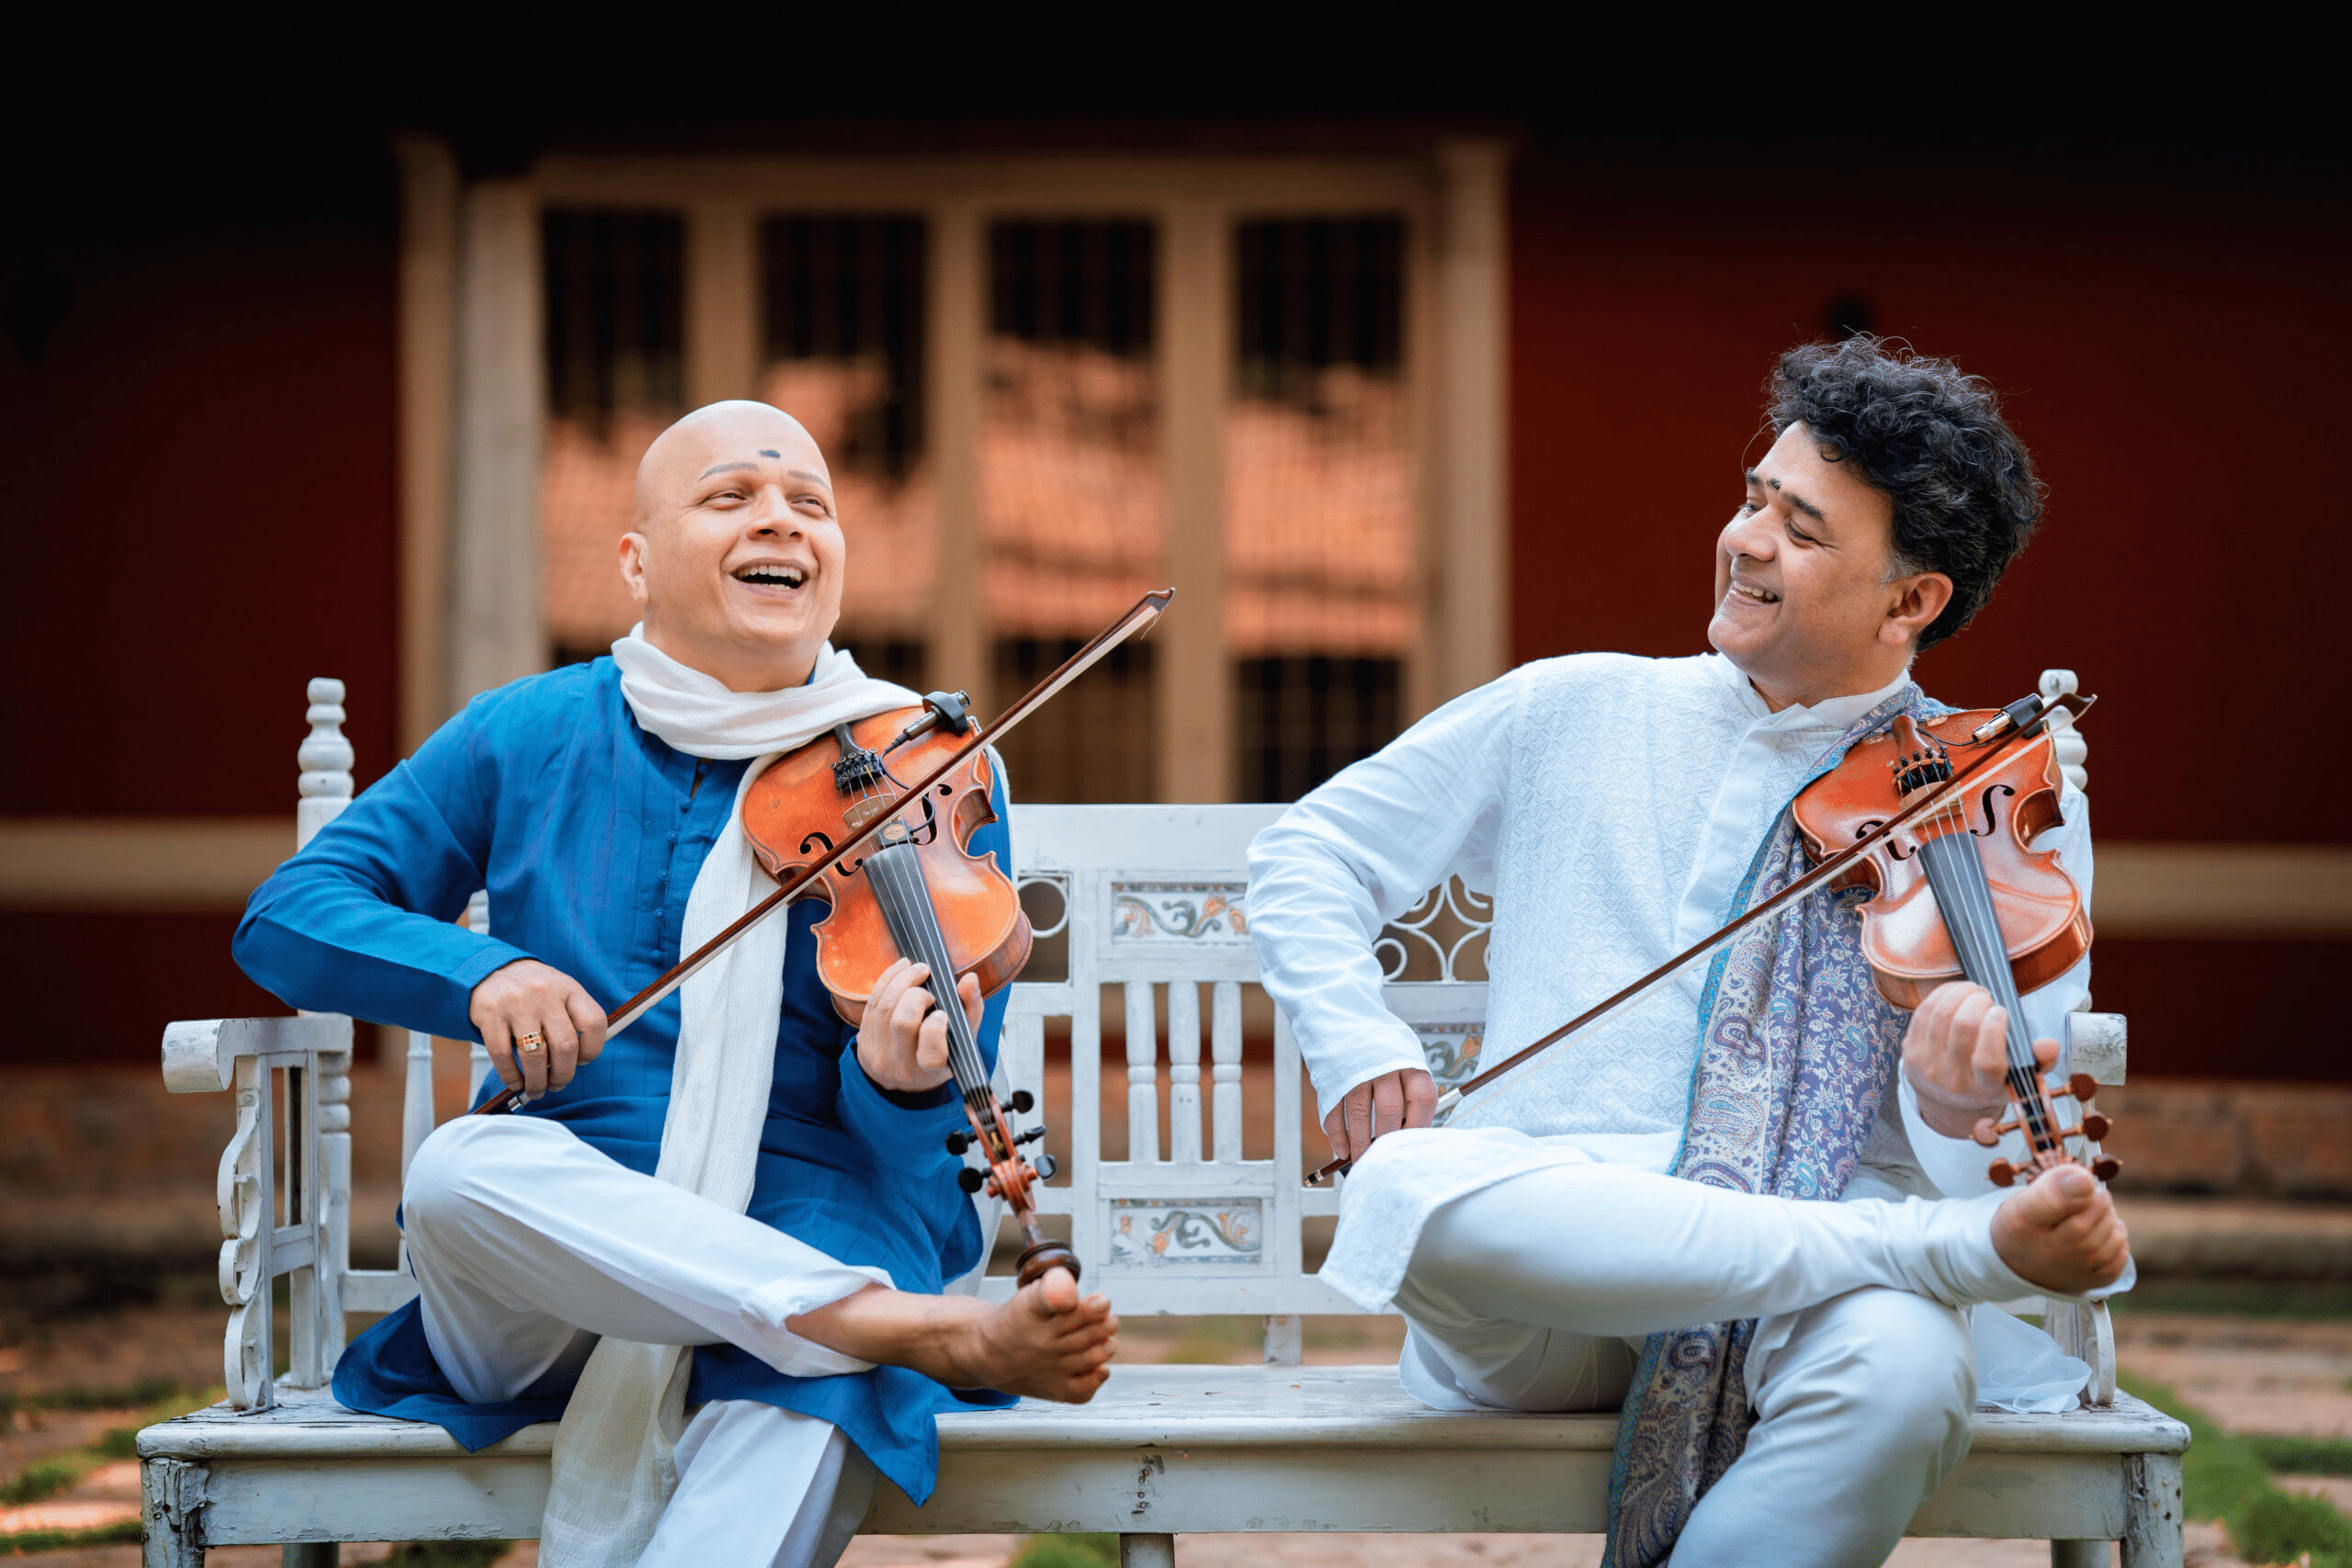 Ganesh and Kumaresh laugh to one another whilst playing their violins outdoors on a white bench